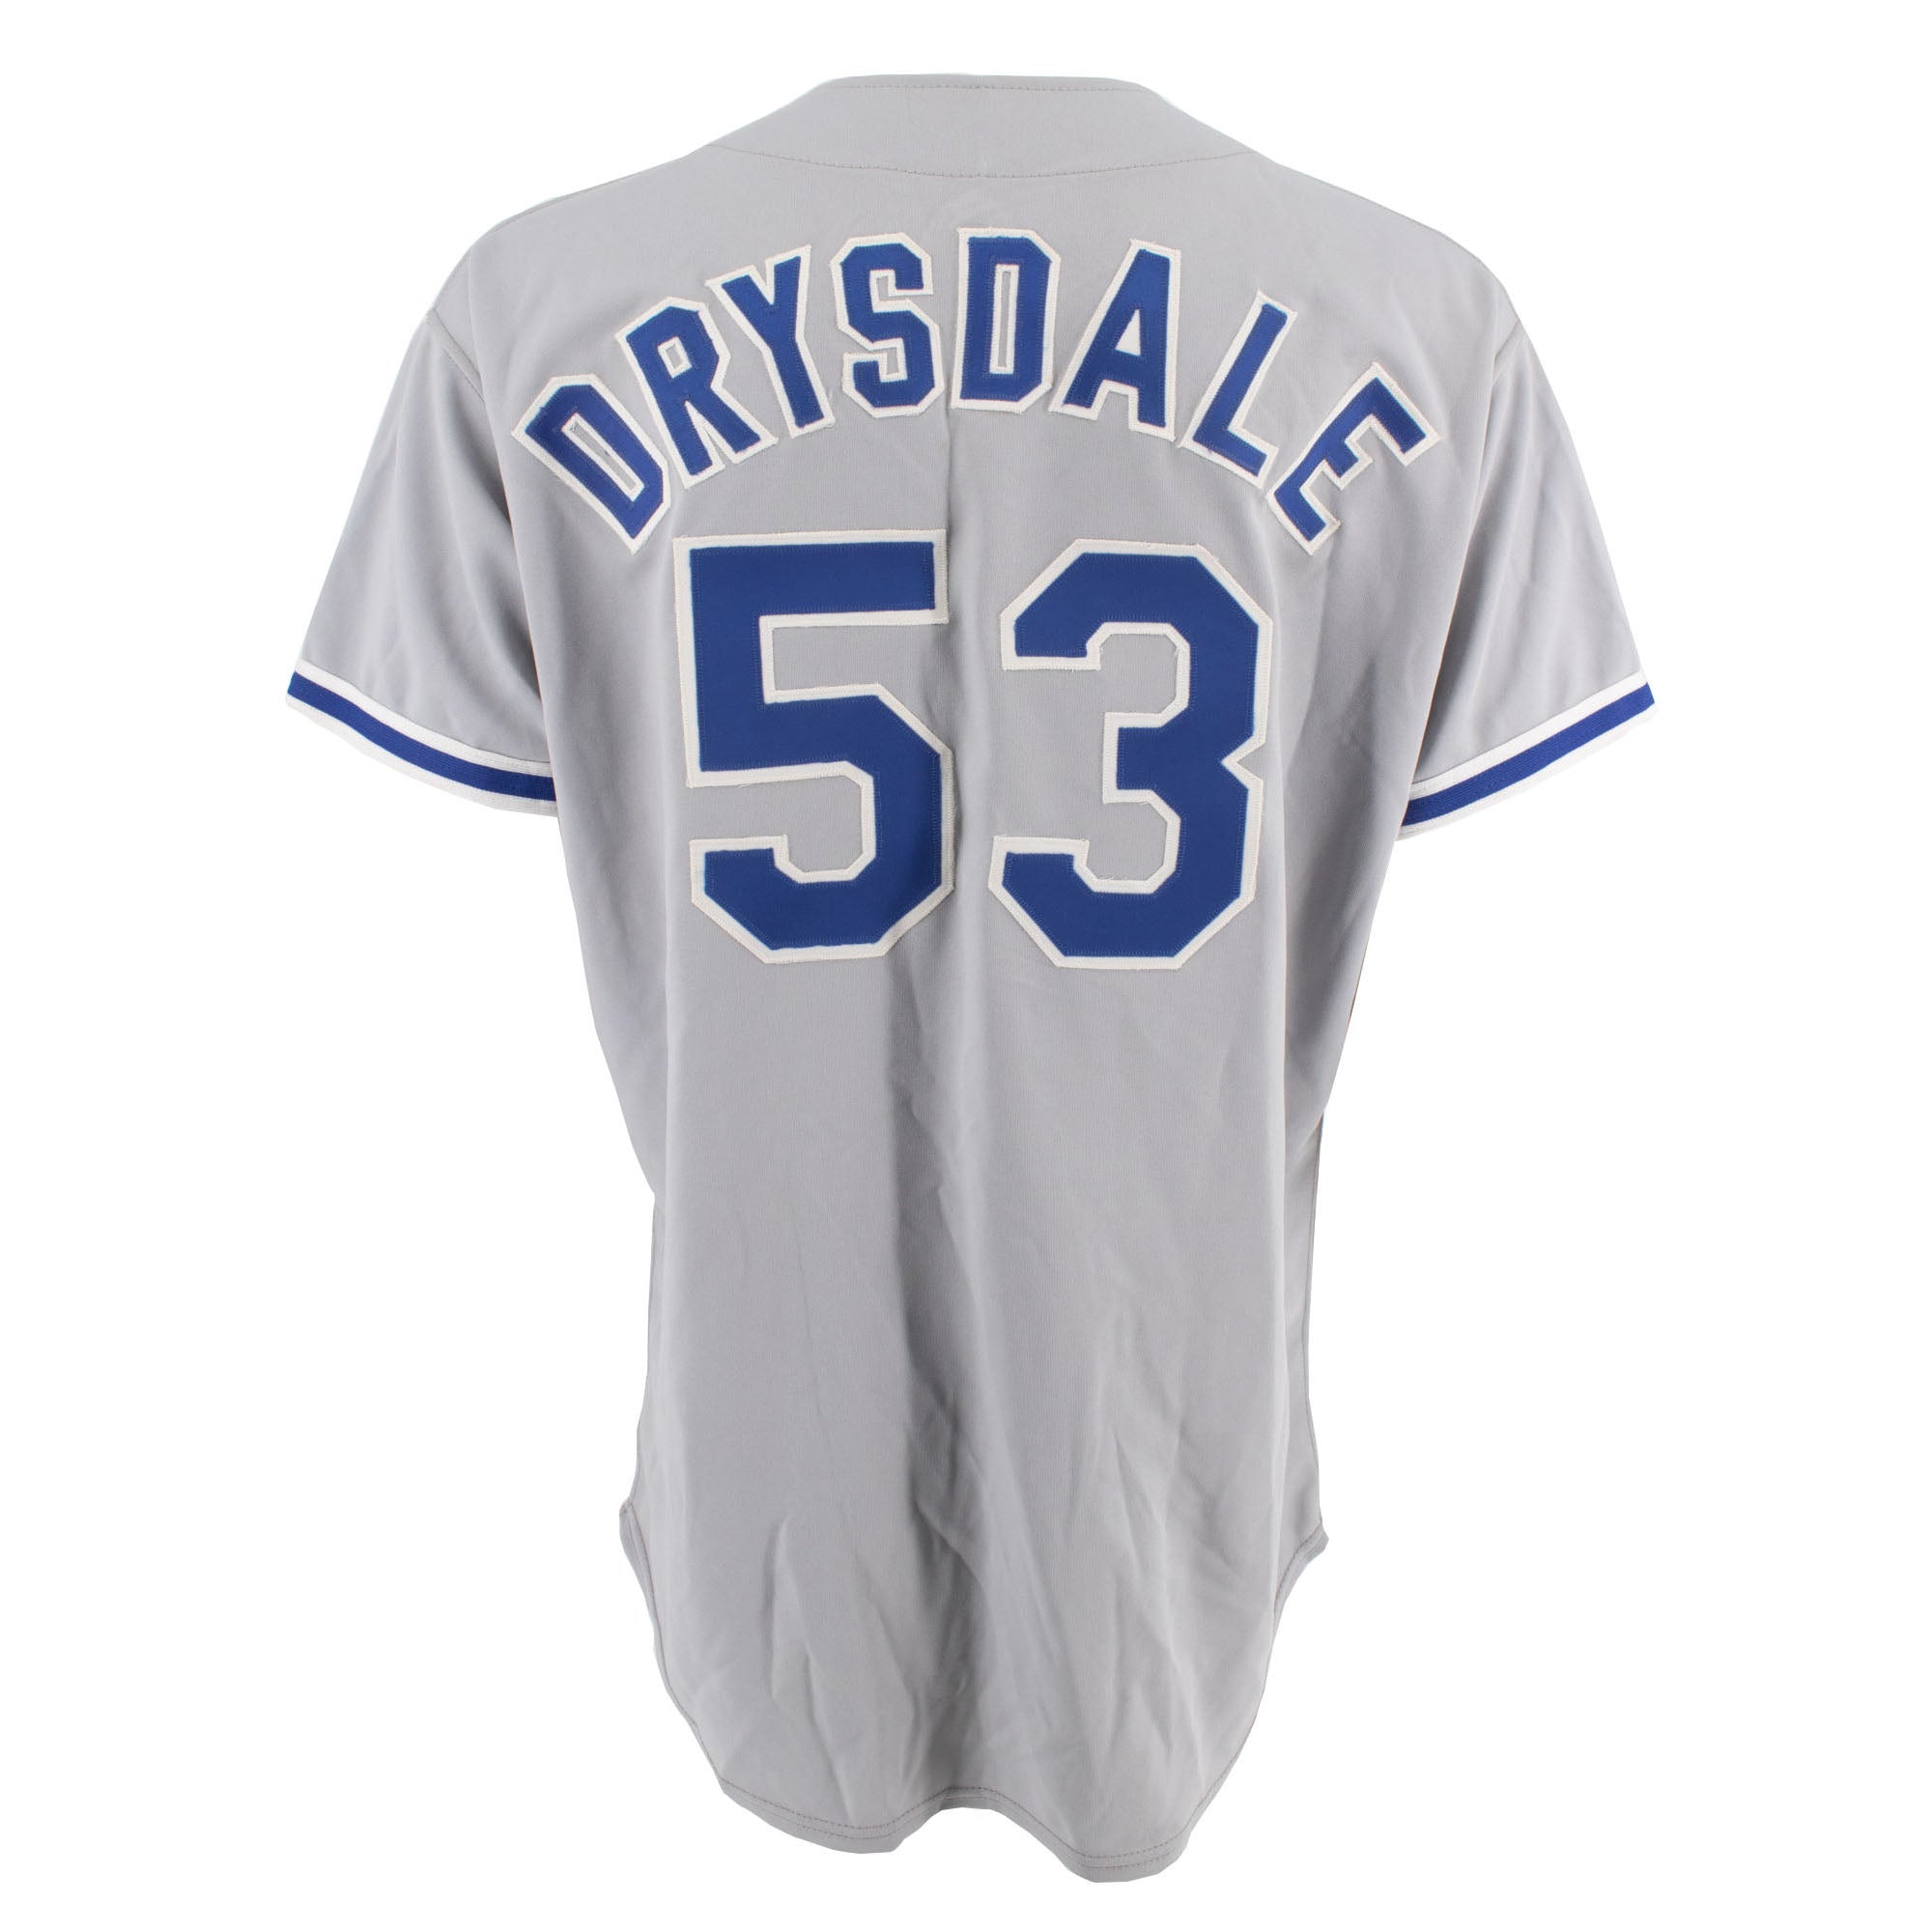 Don Drysdale Old Timers Game Worn Jersey